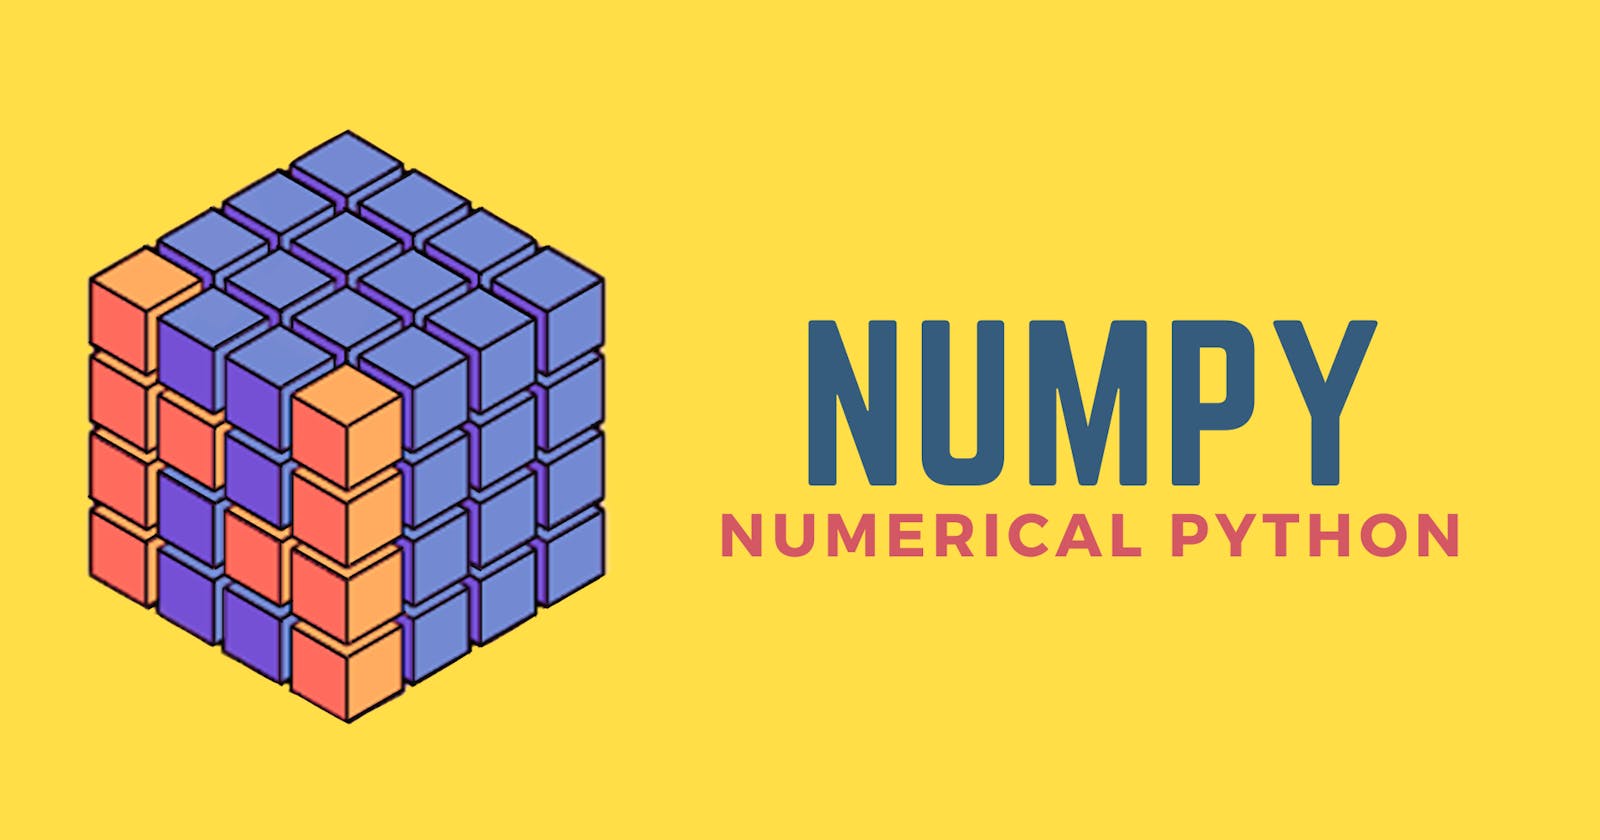 All You Need To Know About Numpy